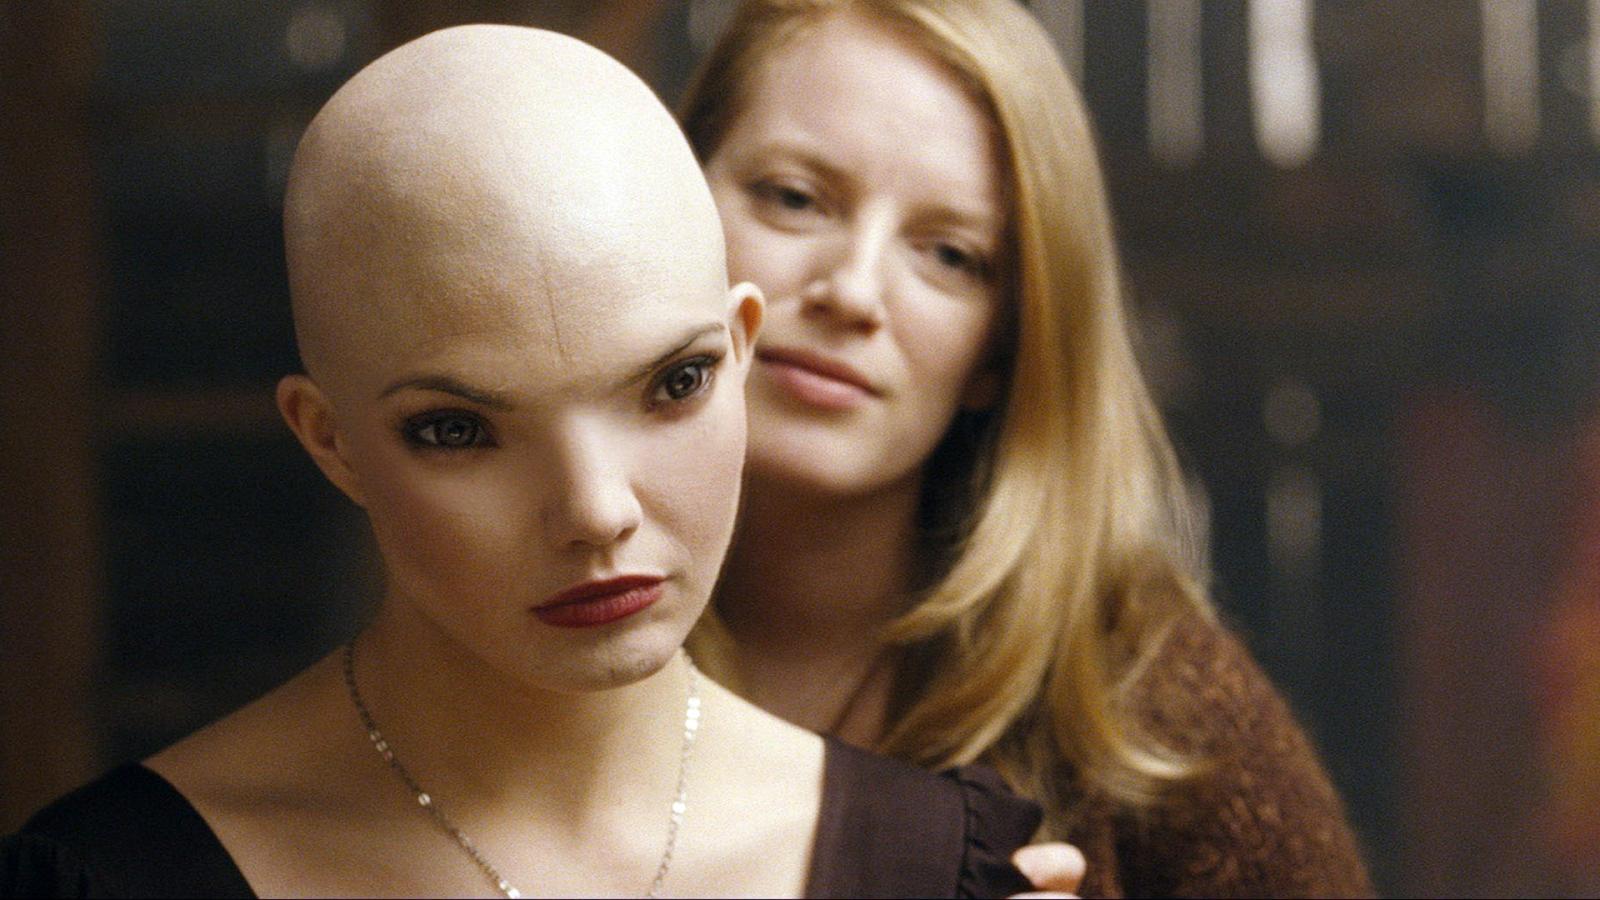 8 Underrated Sci-Fi Movies of the 2000s Worth Revisiting - image 8